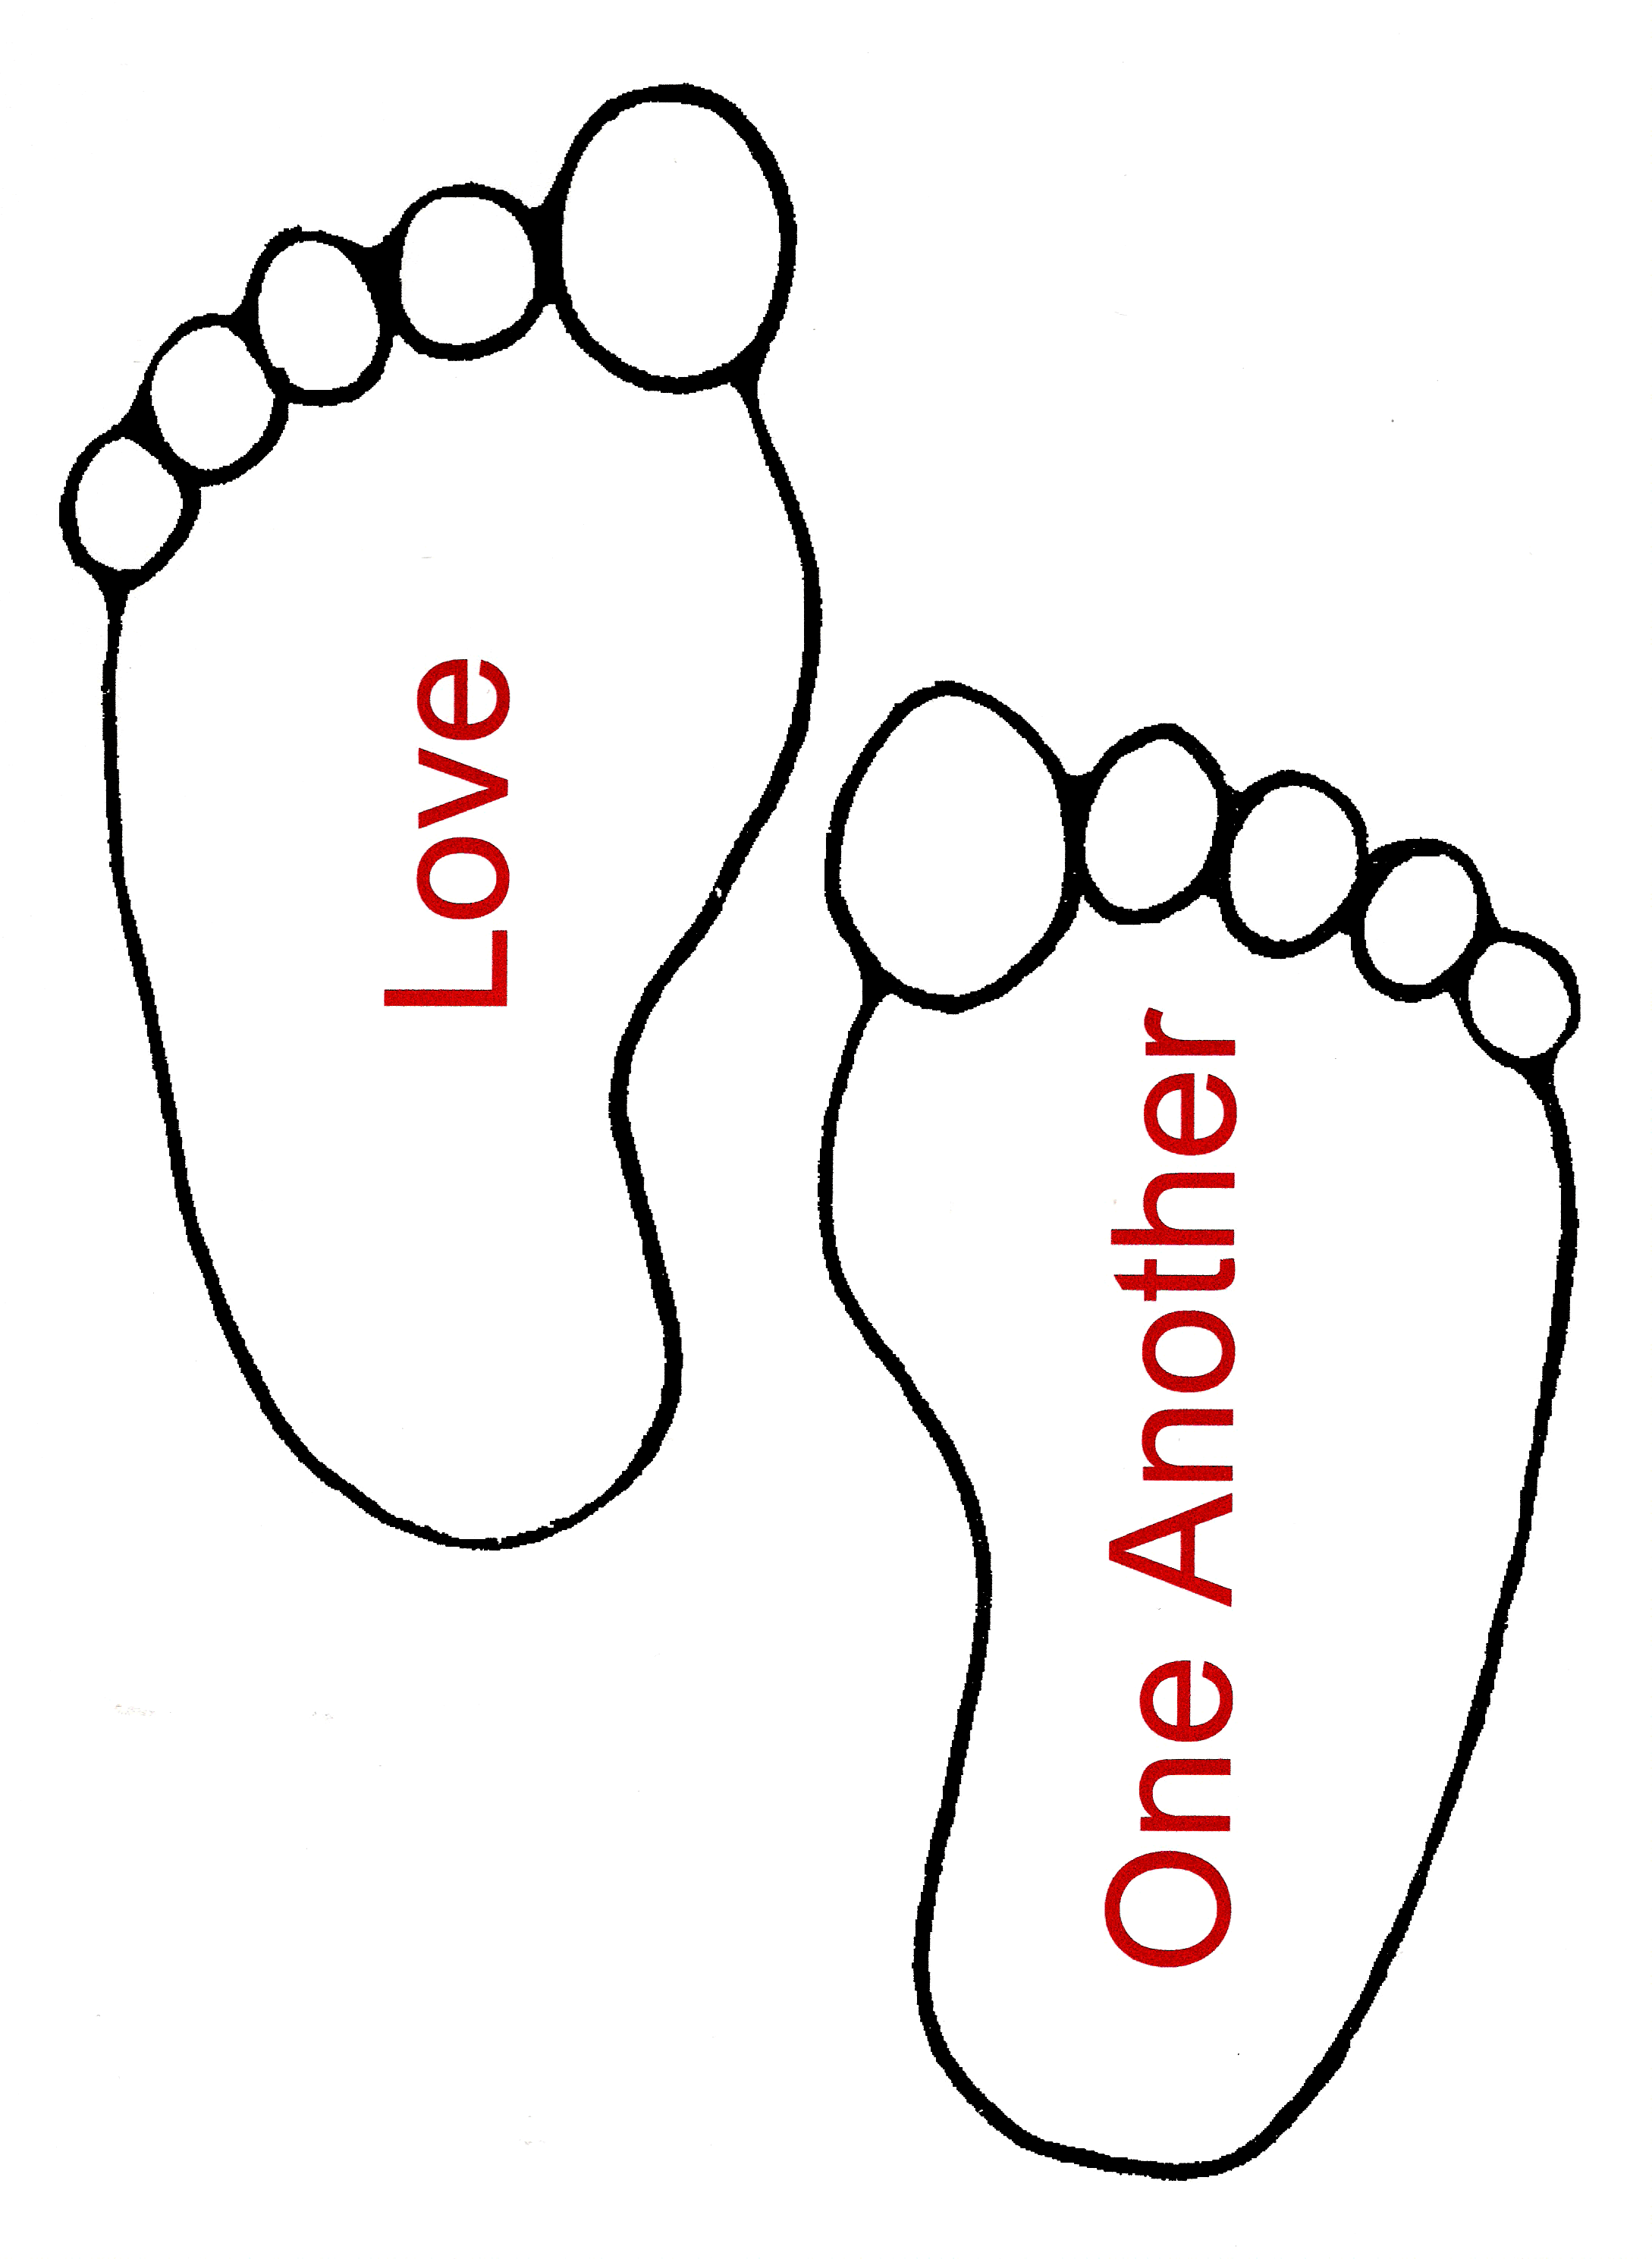 Footprint Coloring Sheet - Coloring Pages for Kids and for Adults